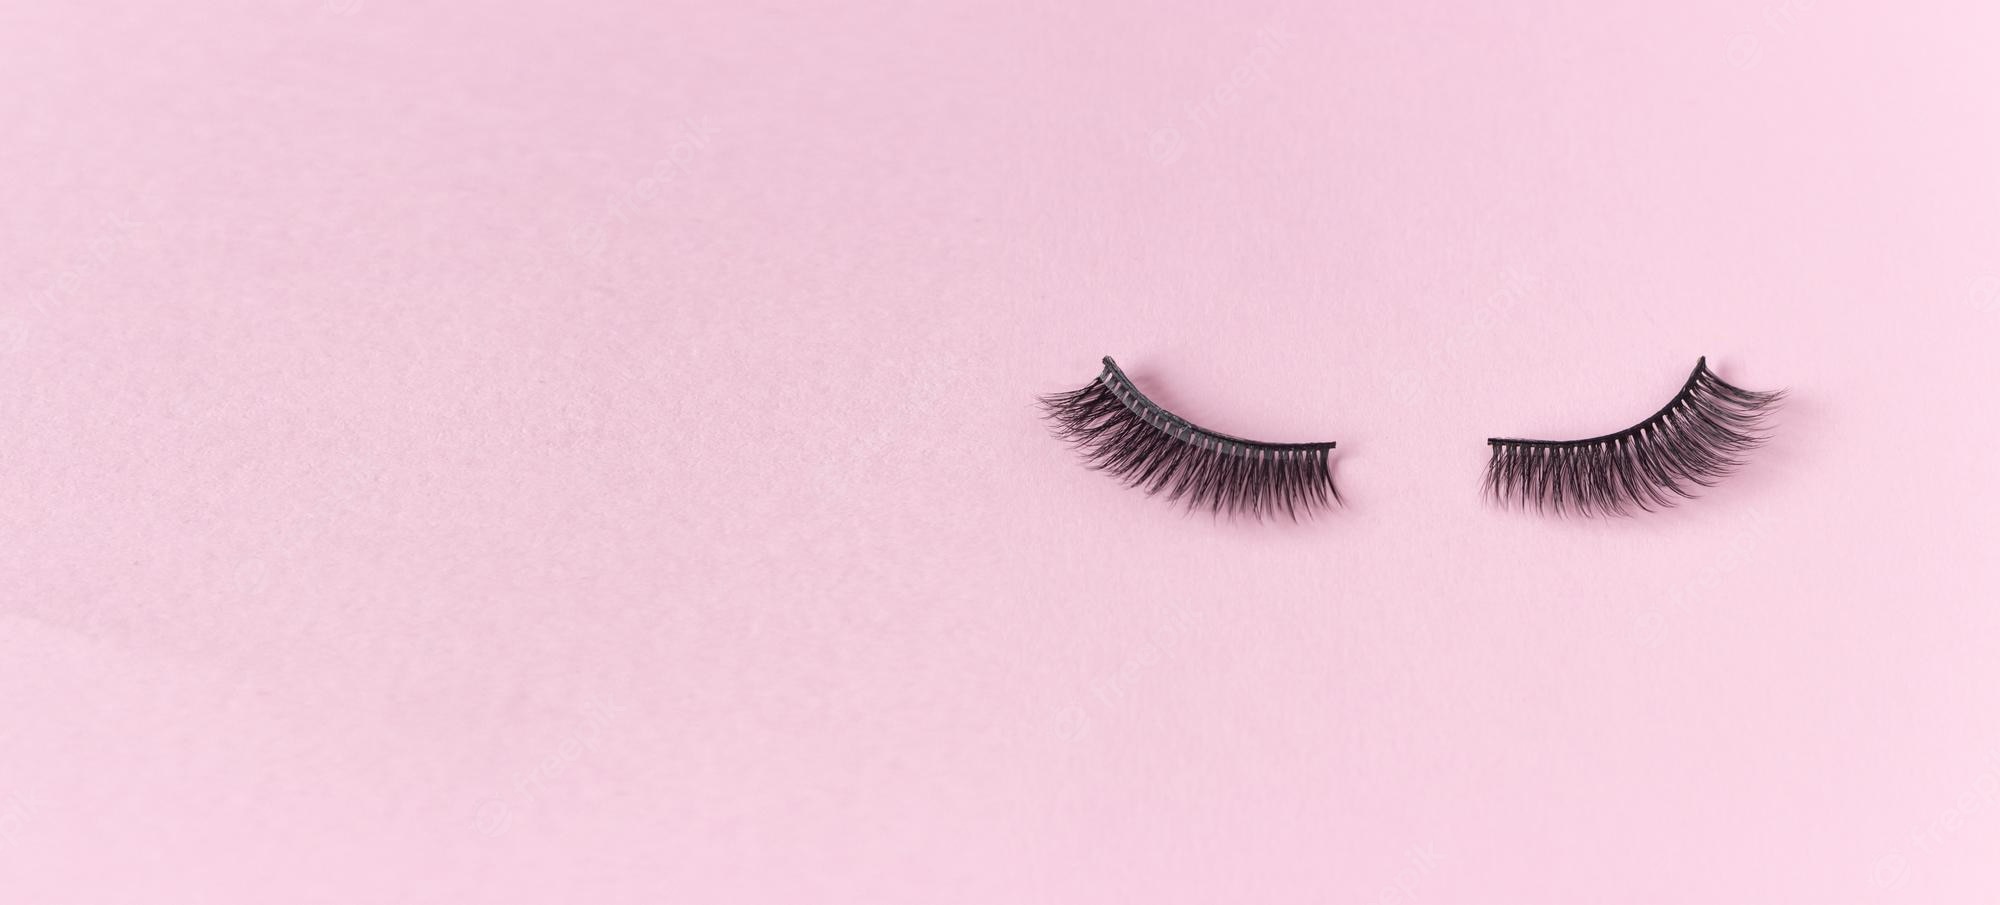 Premium photo artificial eyelashes on a pink background free space for text the concept of eyelash extensions makeup